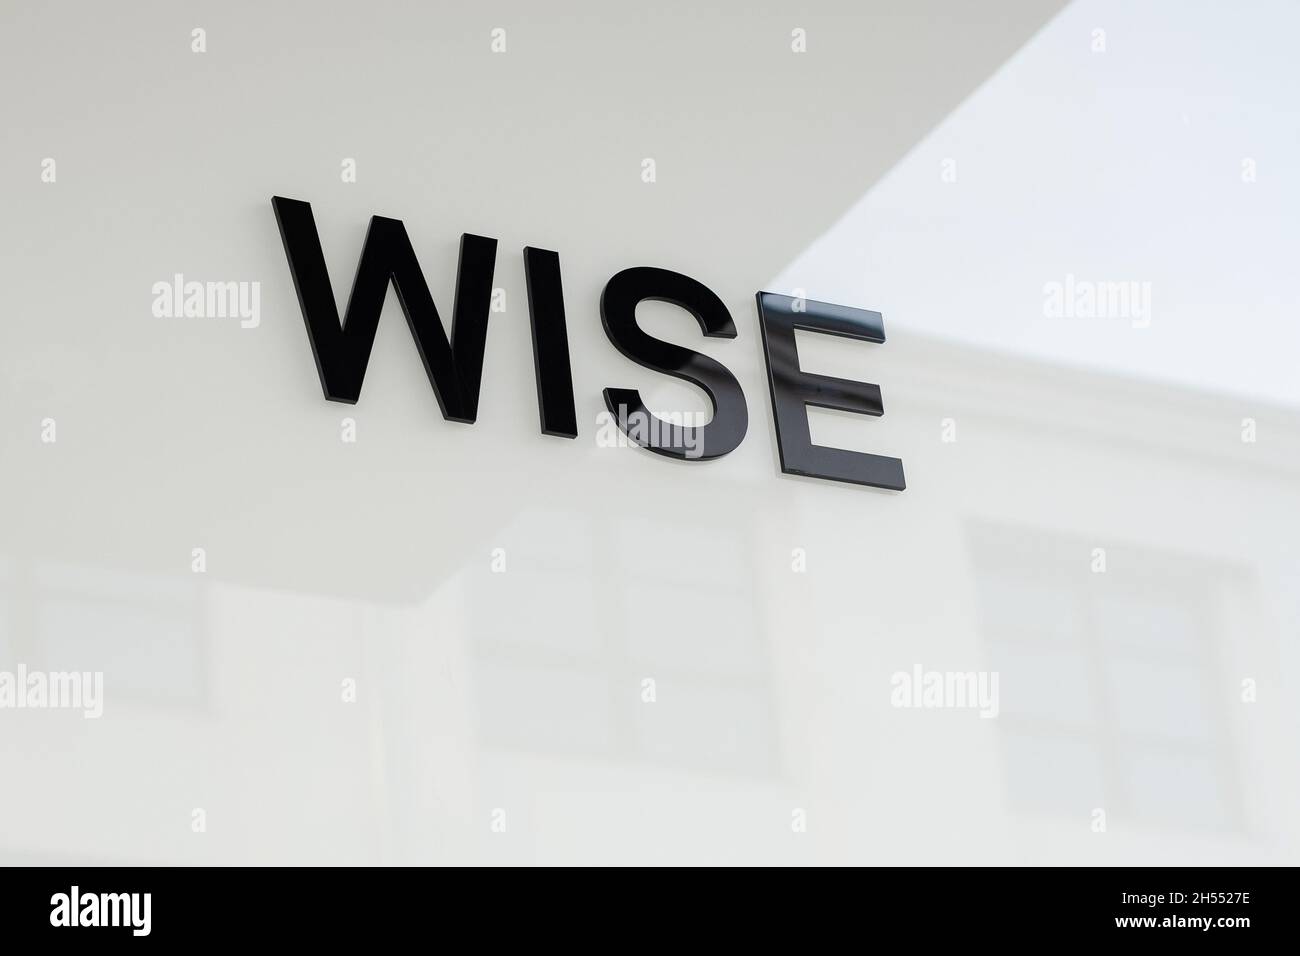 Wise company logo on their head office facade. Formerly TransferWise. London-based financial technology trading in London Stock Exchange. Stock Photo